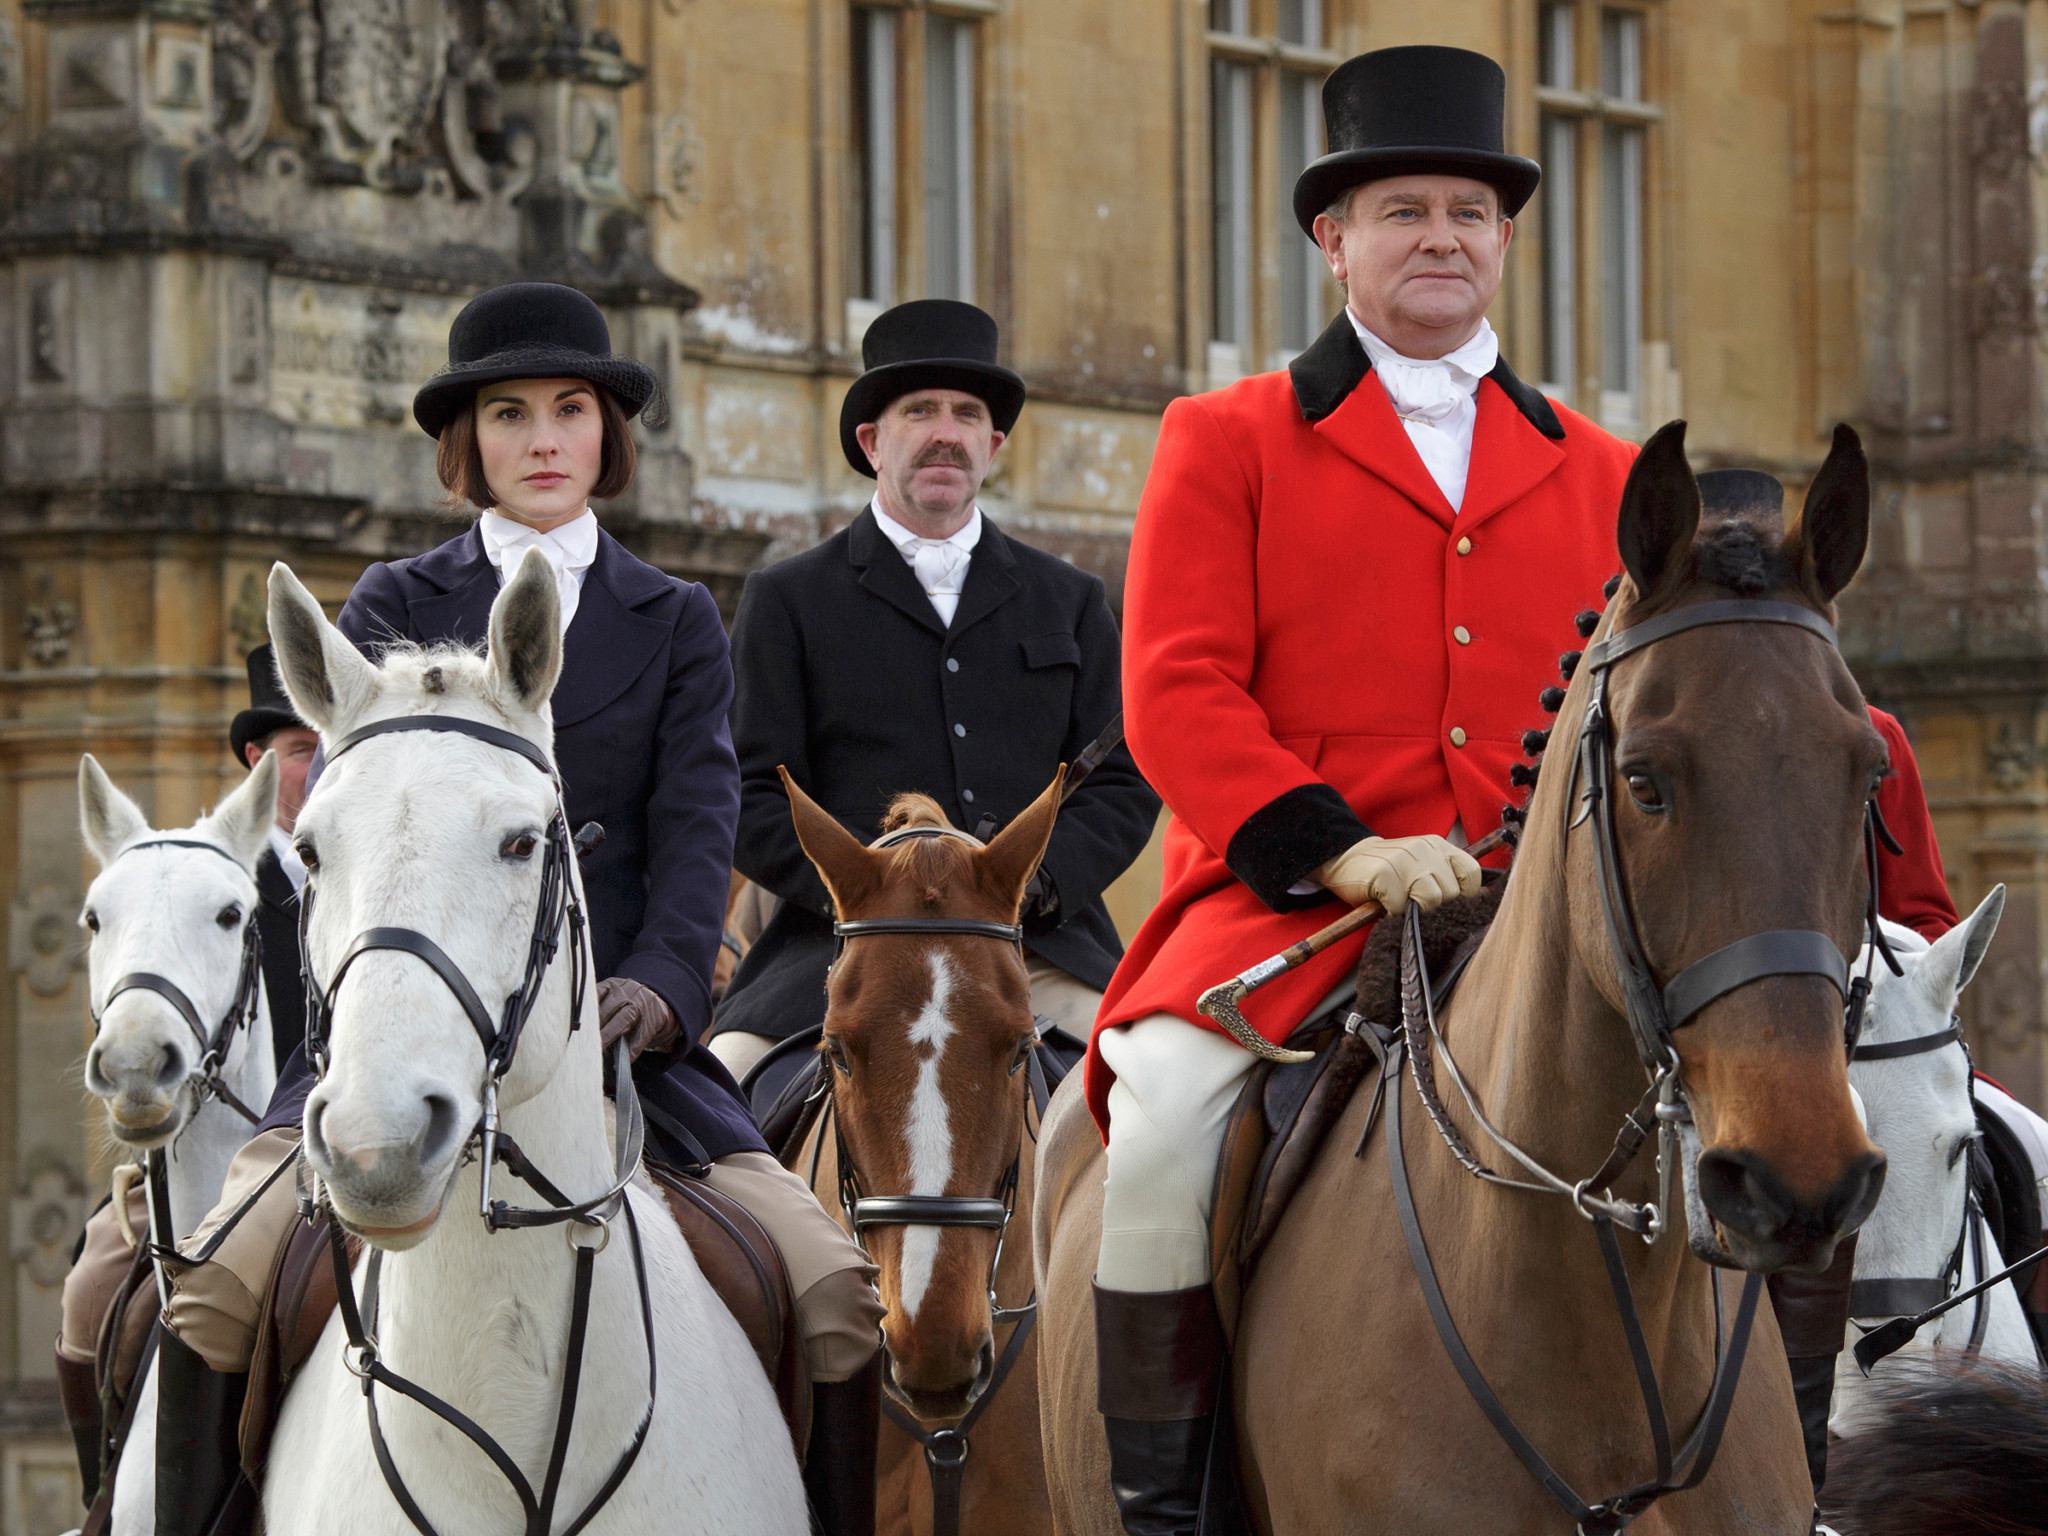 Roush Review: One Last Satisfying Visit to Downton Abbey